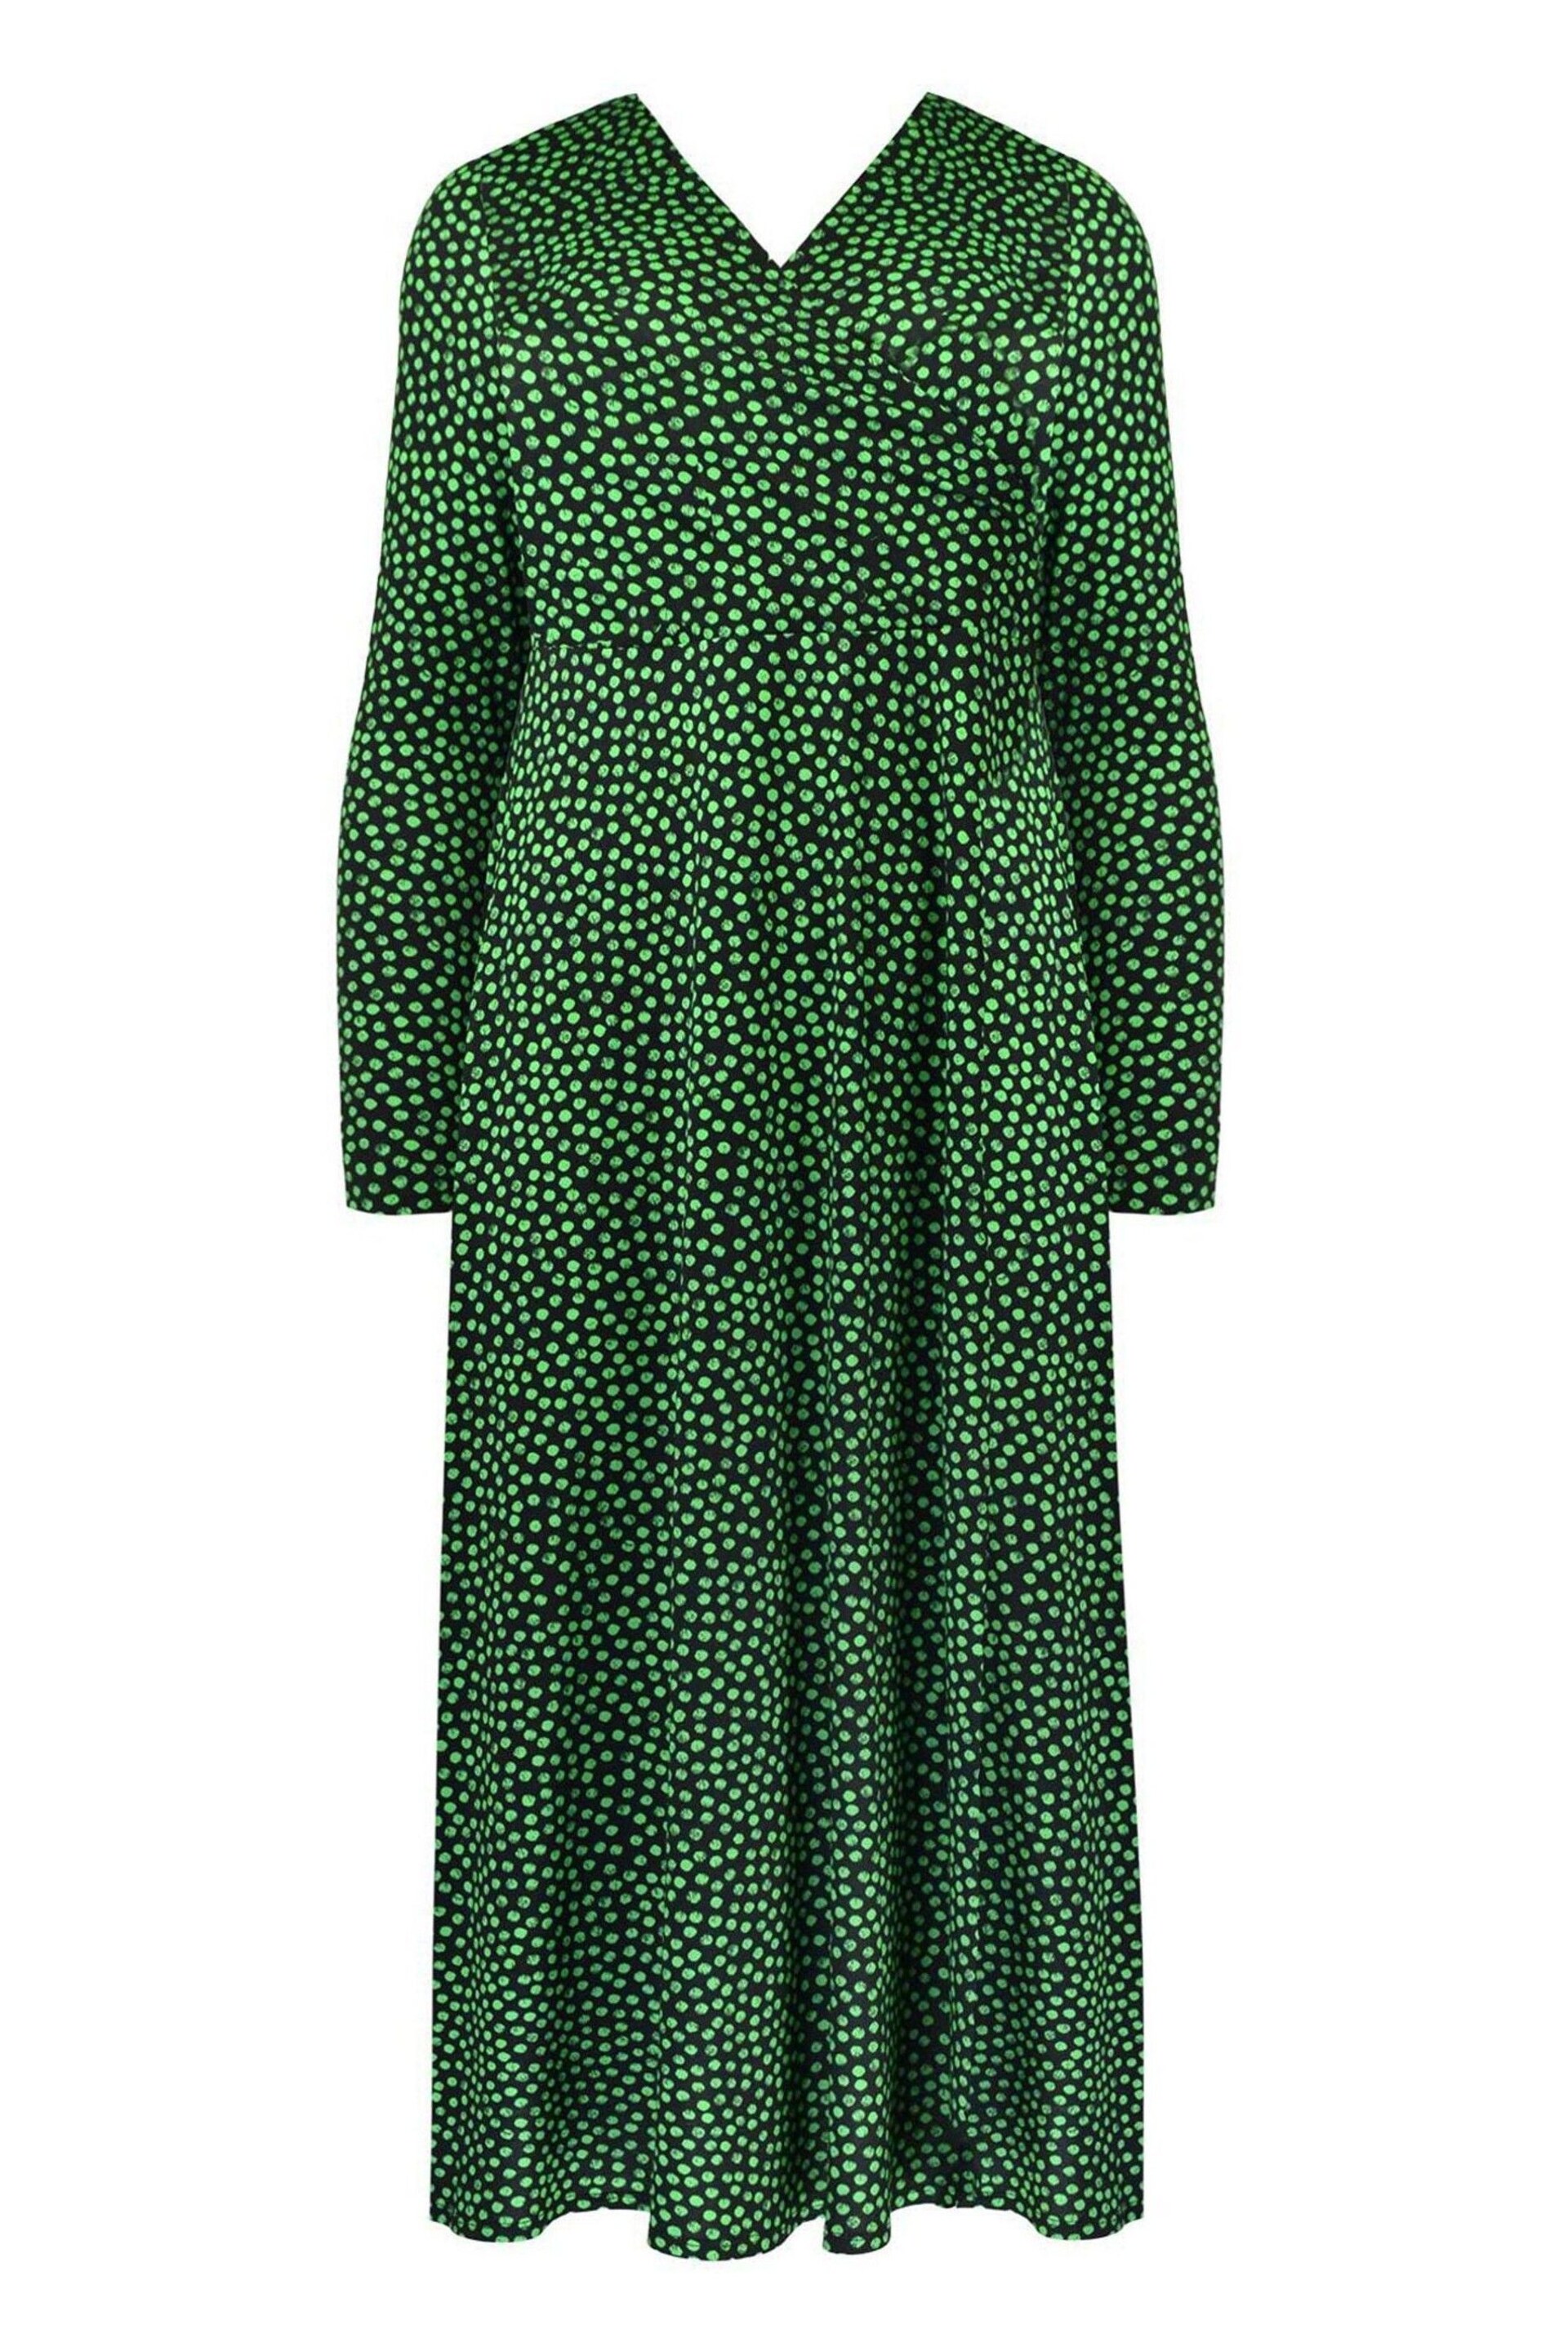 Live Unlimited Green Curve Spot Print Jersey Wrap Dress - Image 4 of 5